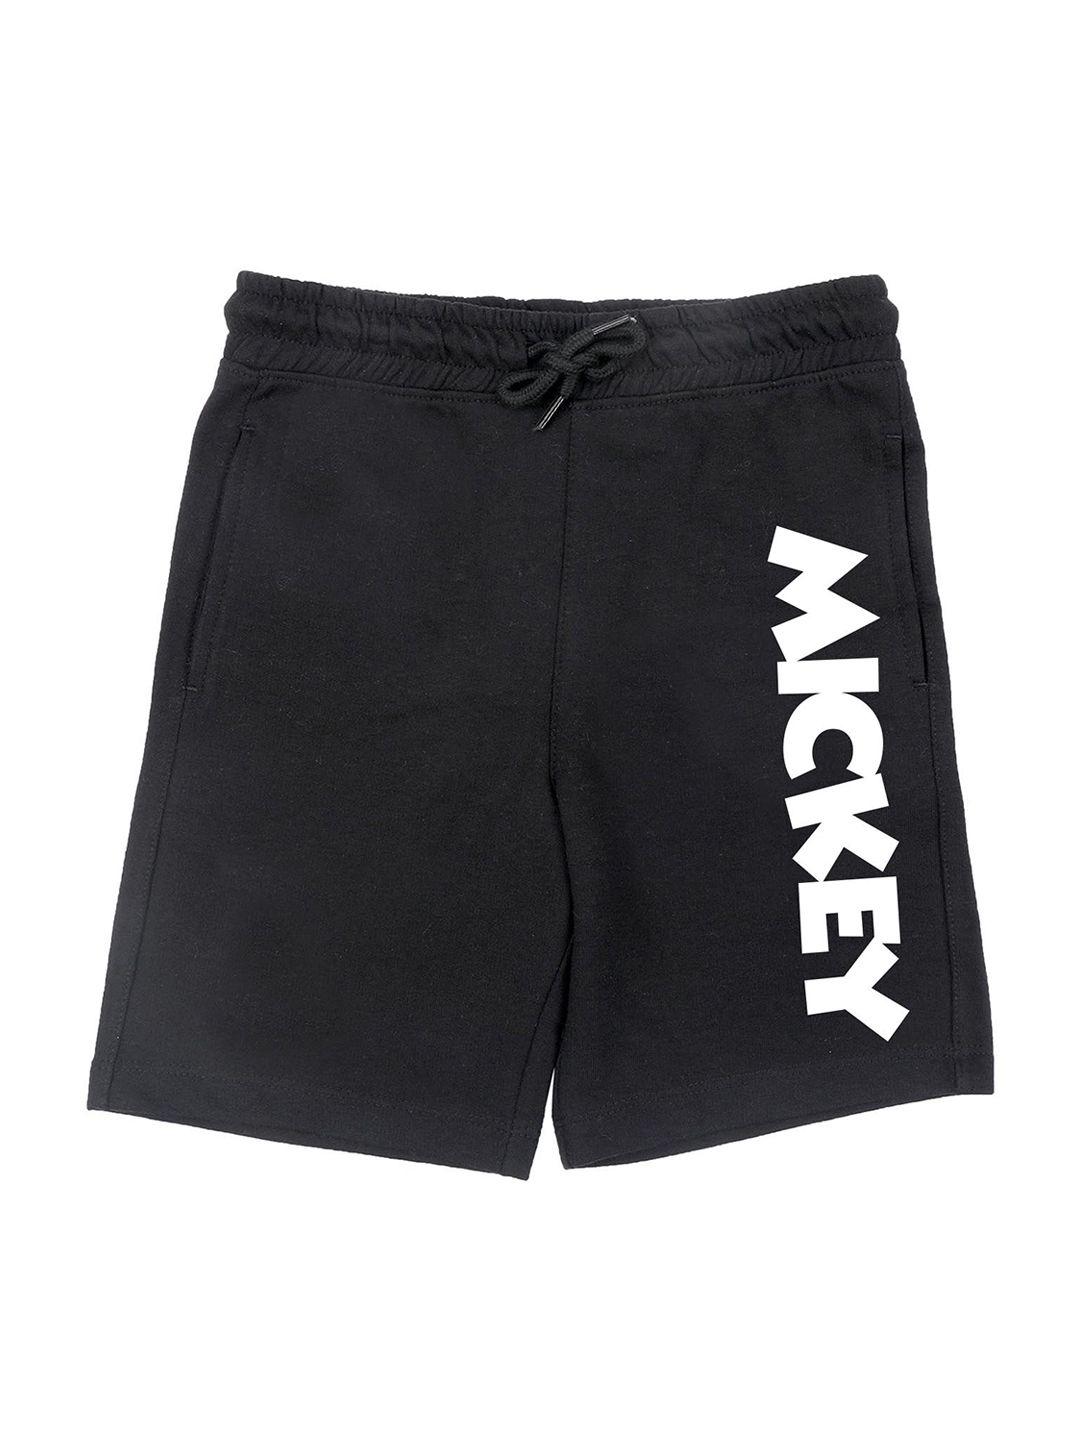 disney-by-wear-your-mind-boys-black-mickey-mouse-printed-shorts